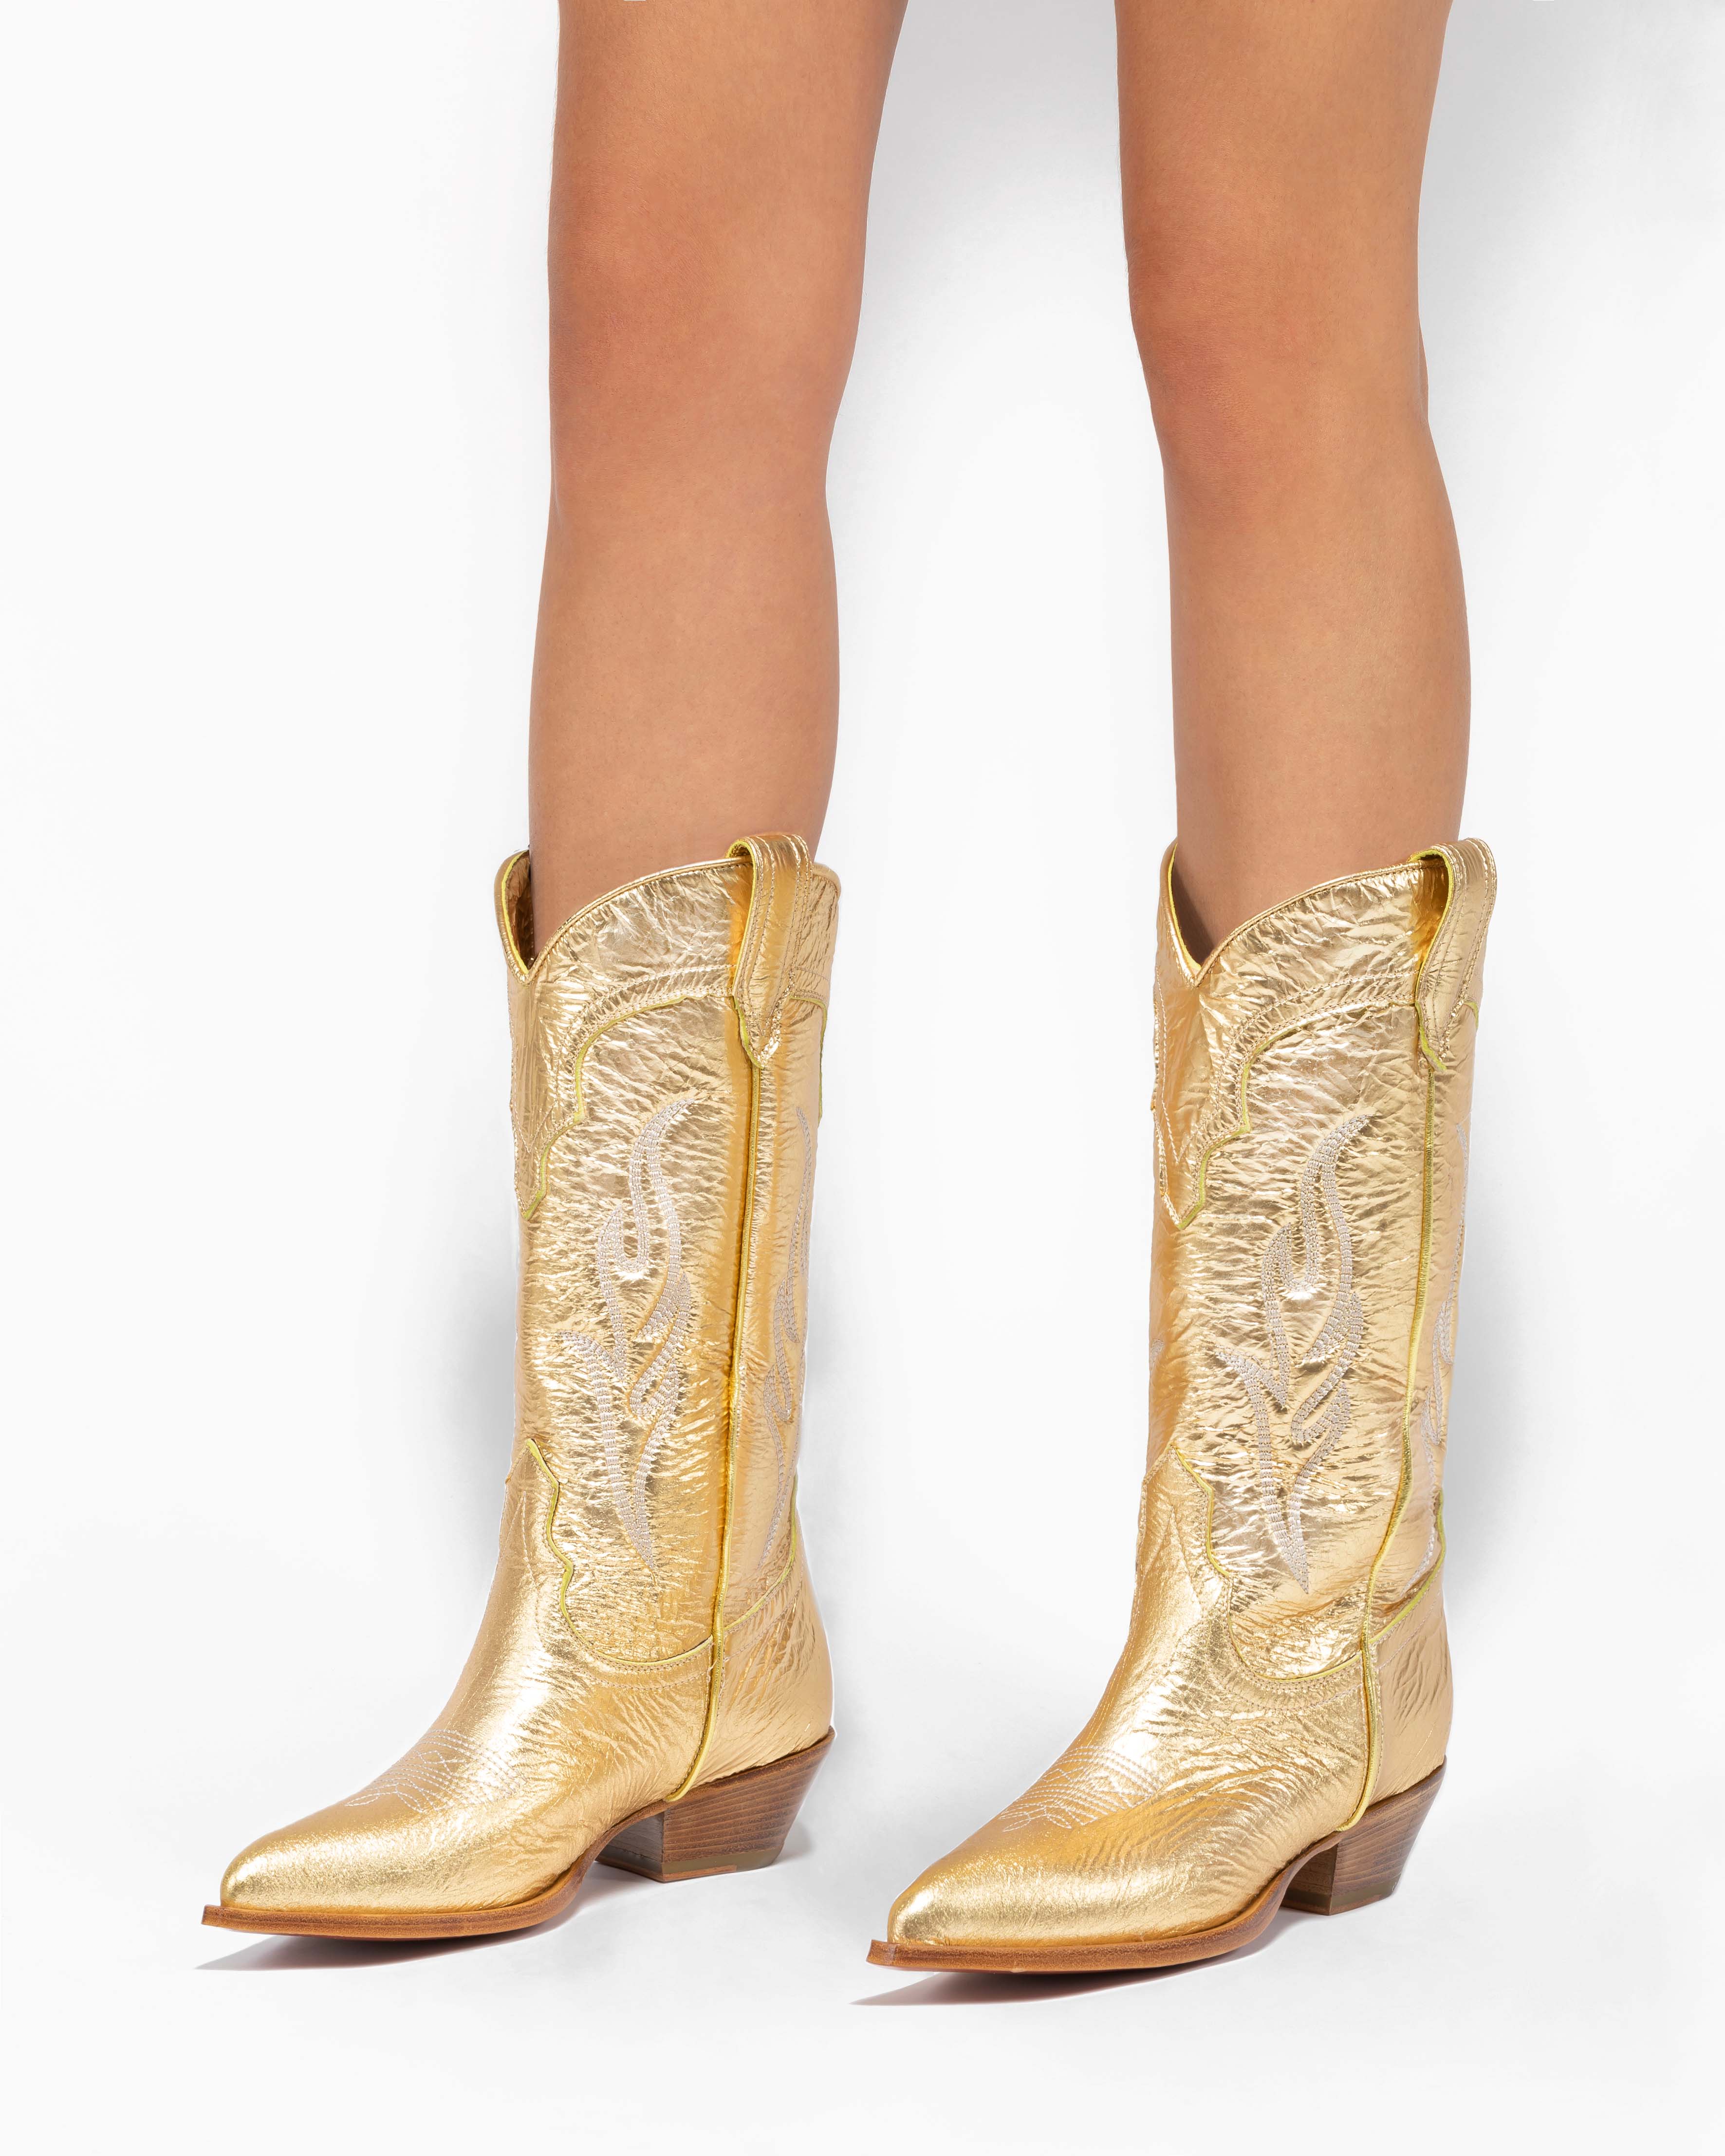 SANTA FE Women's Cowboy Boots in Gold Laminated Leather |Off-White Embroidery_Indossato01